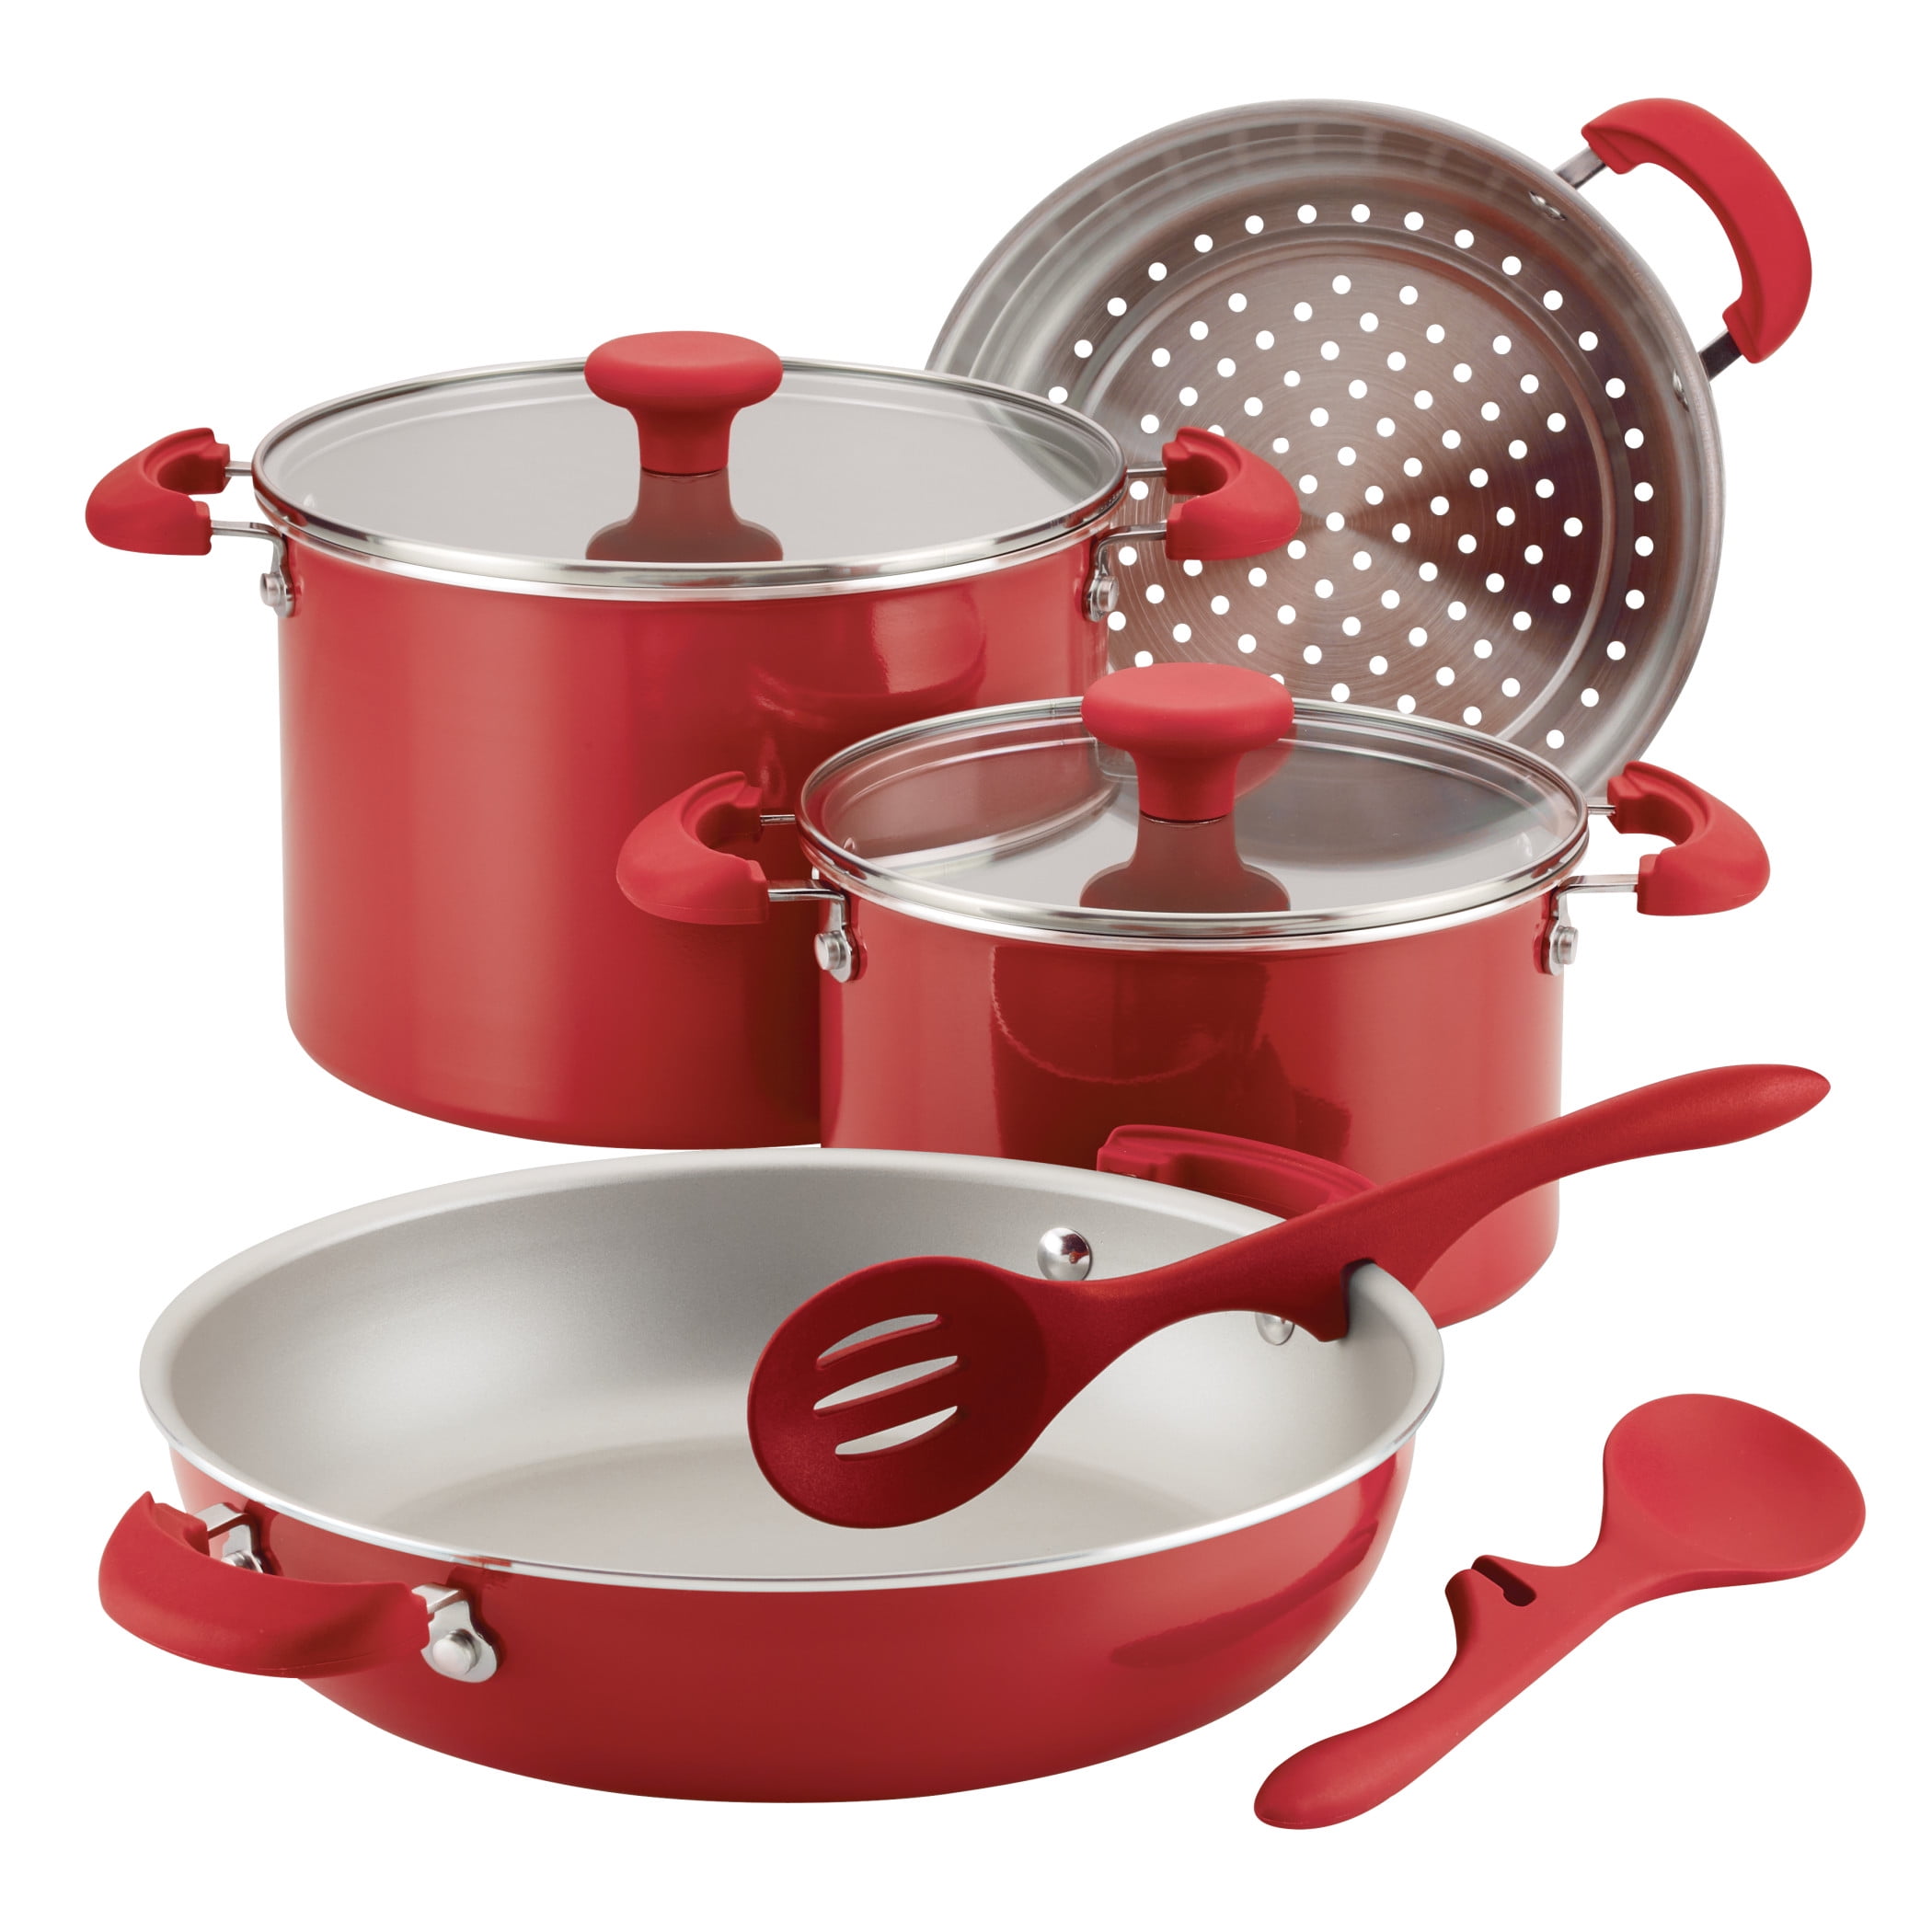 8 cookware sets on sale to help you upgrade your kitchen in a